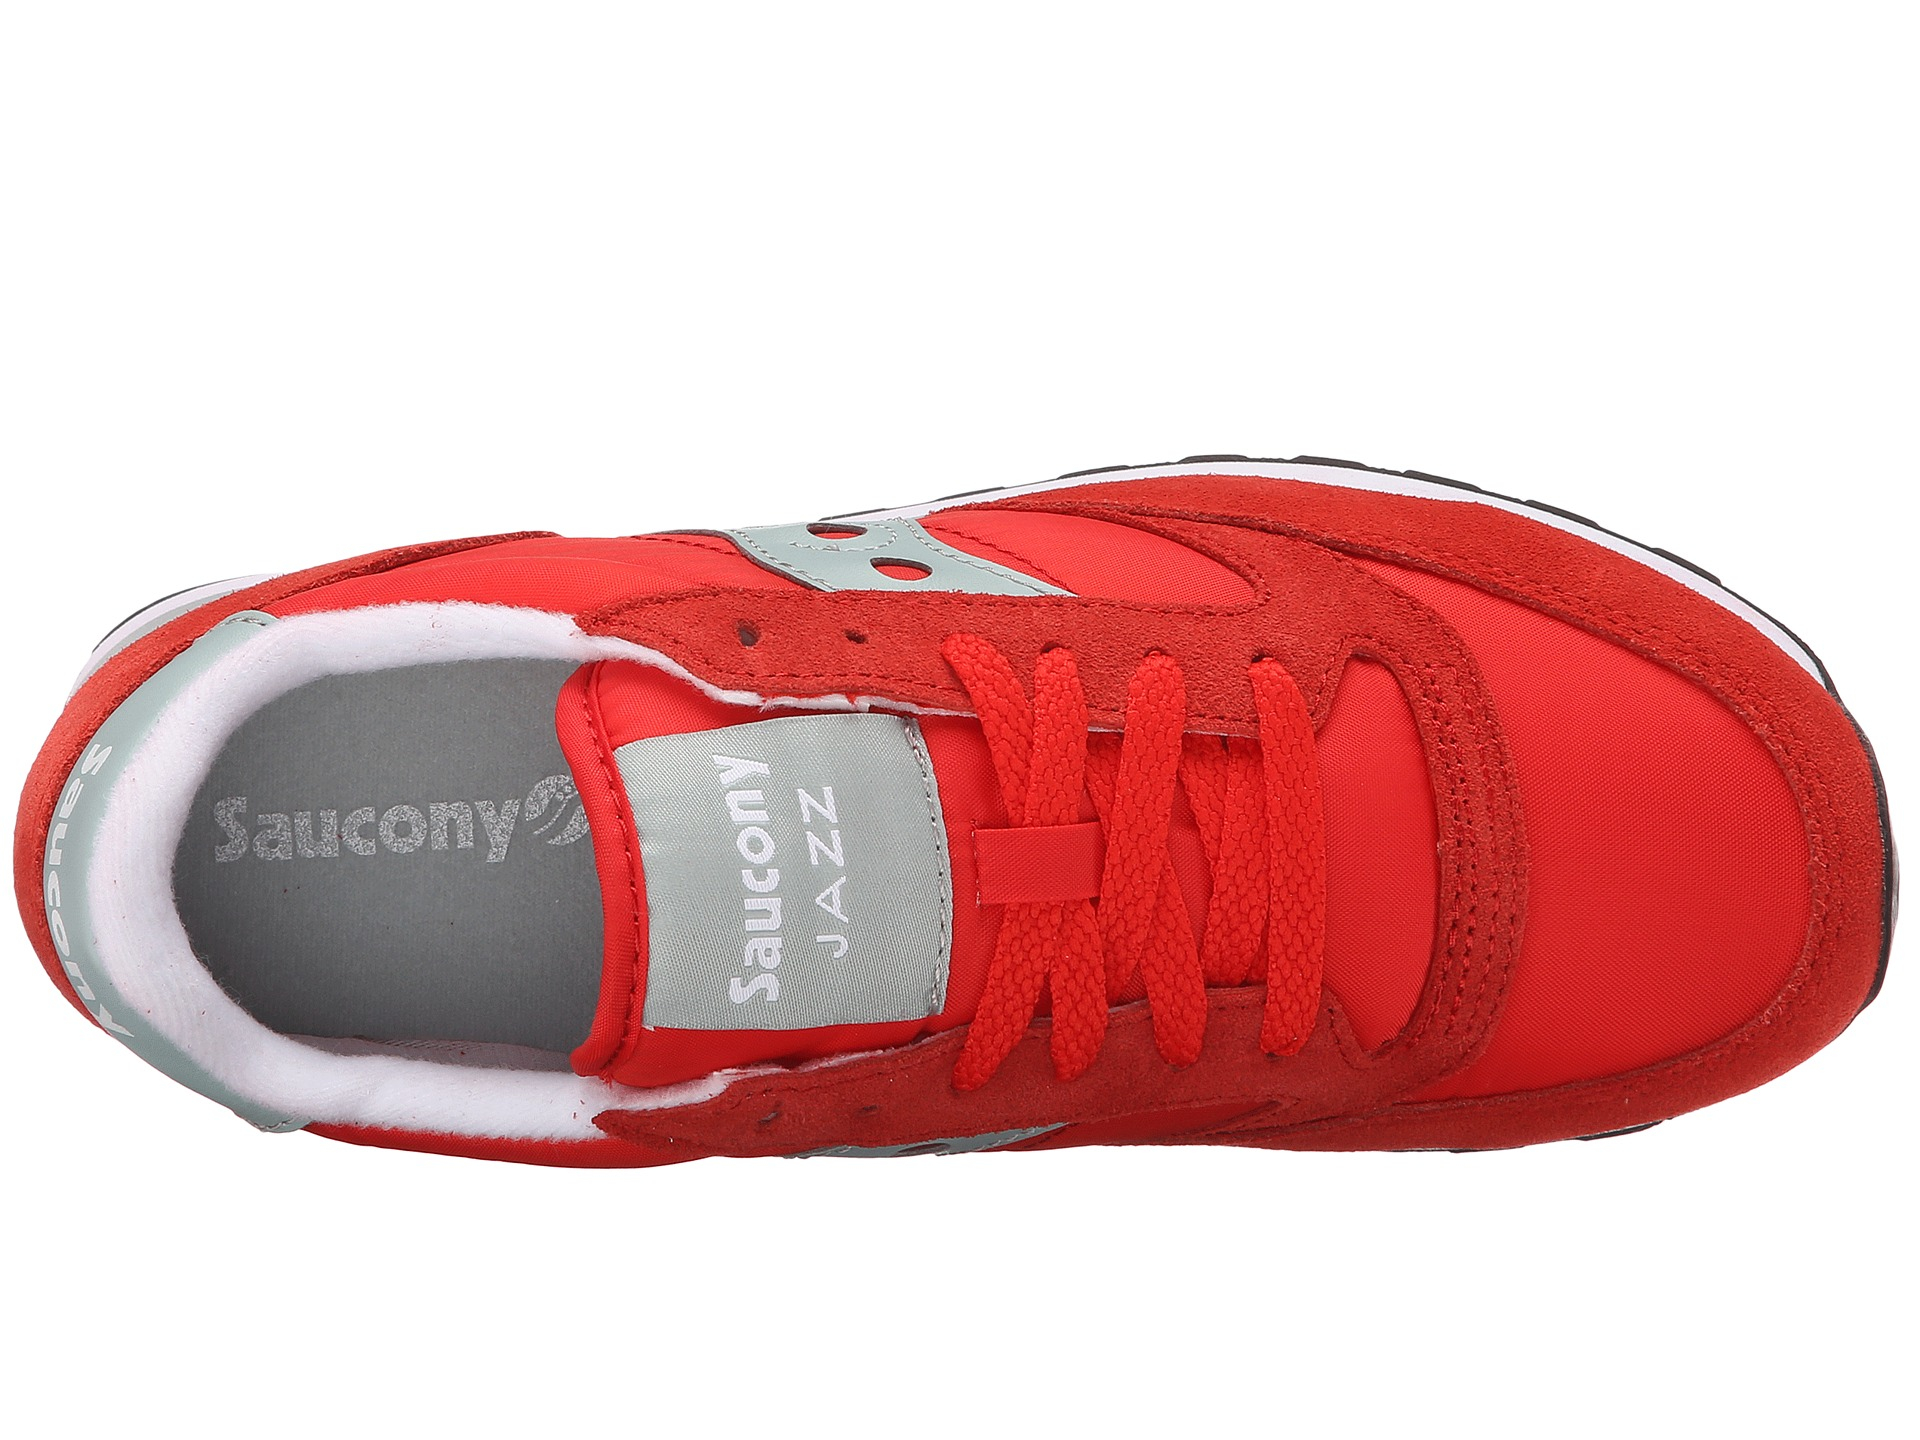 Saucony Jazz Original in Bright Red (Red) | Lyst